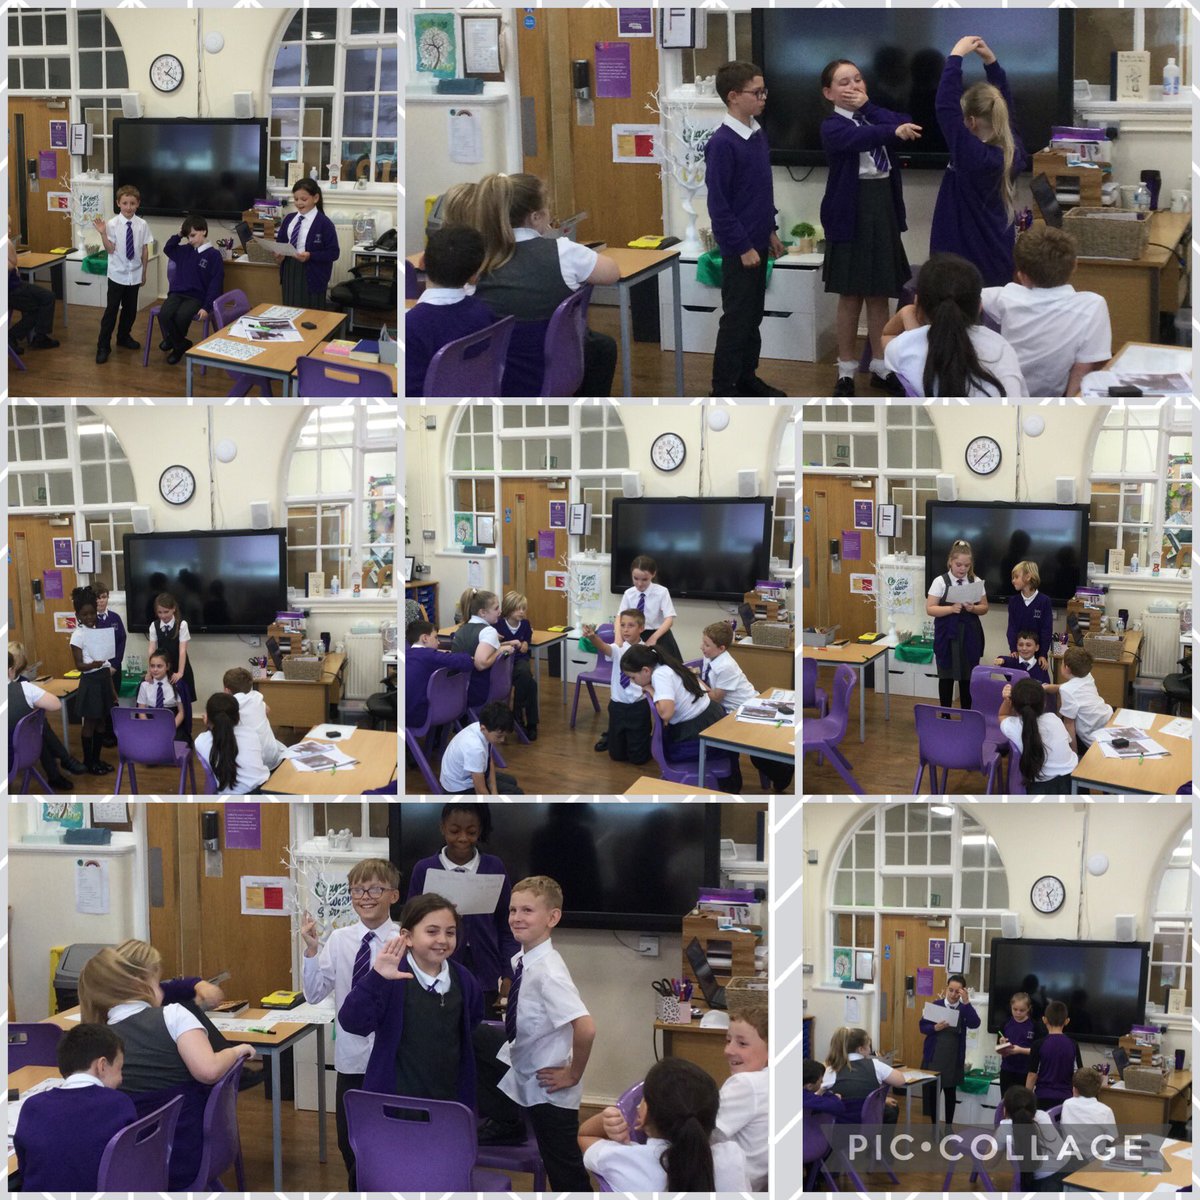 During English, class 5 have been creating freeze frames to depict scenes from our class text. #StGerardsEnglish